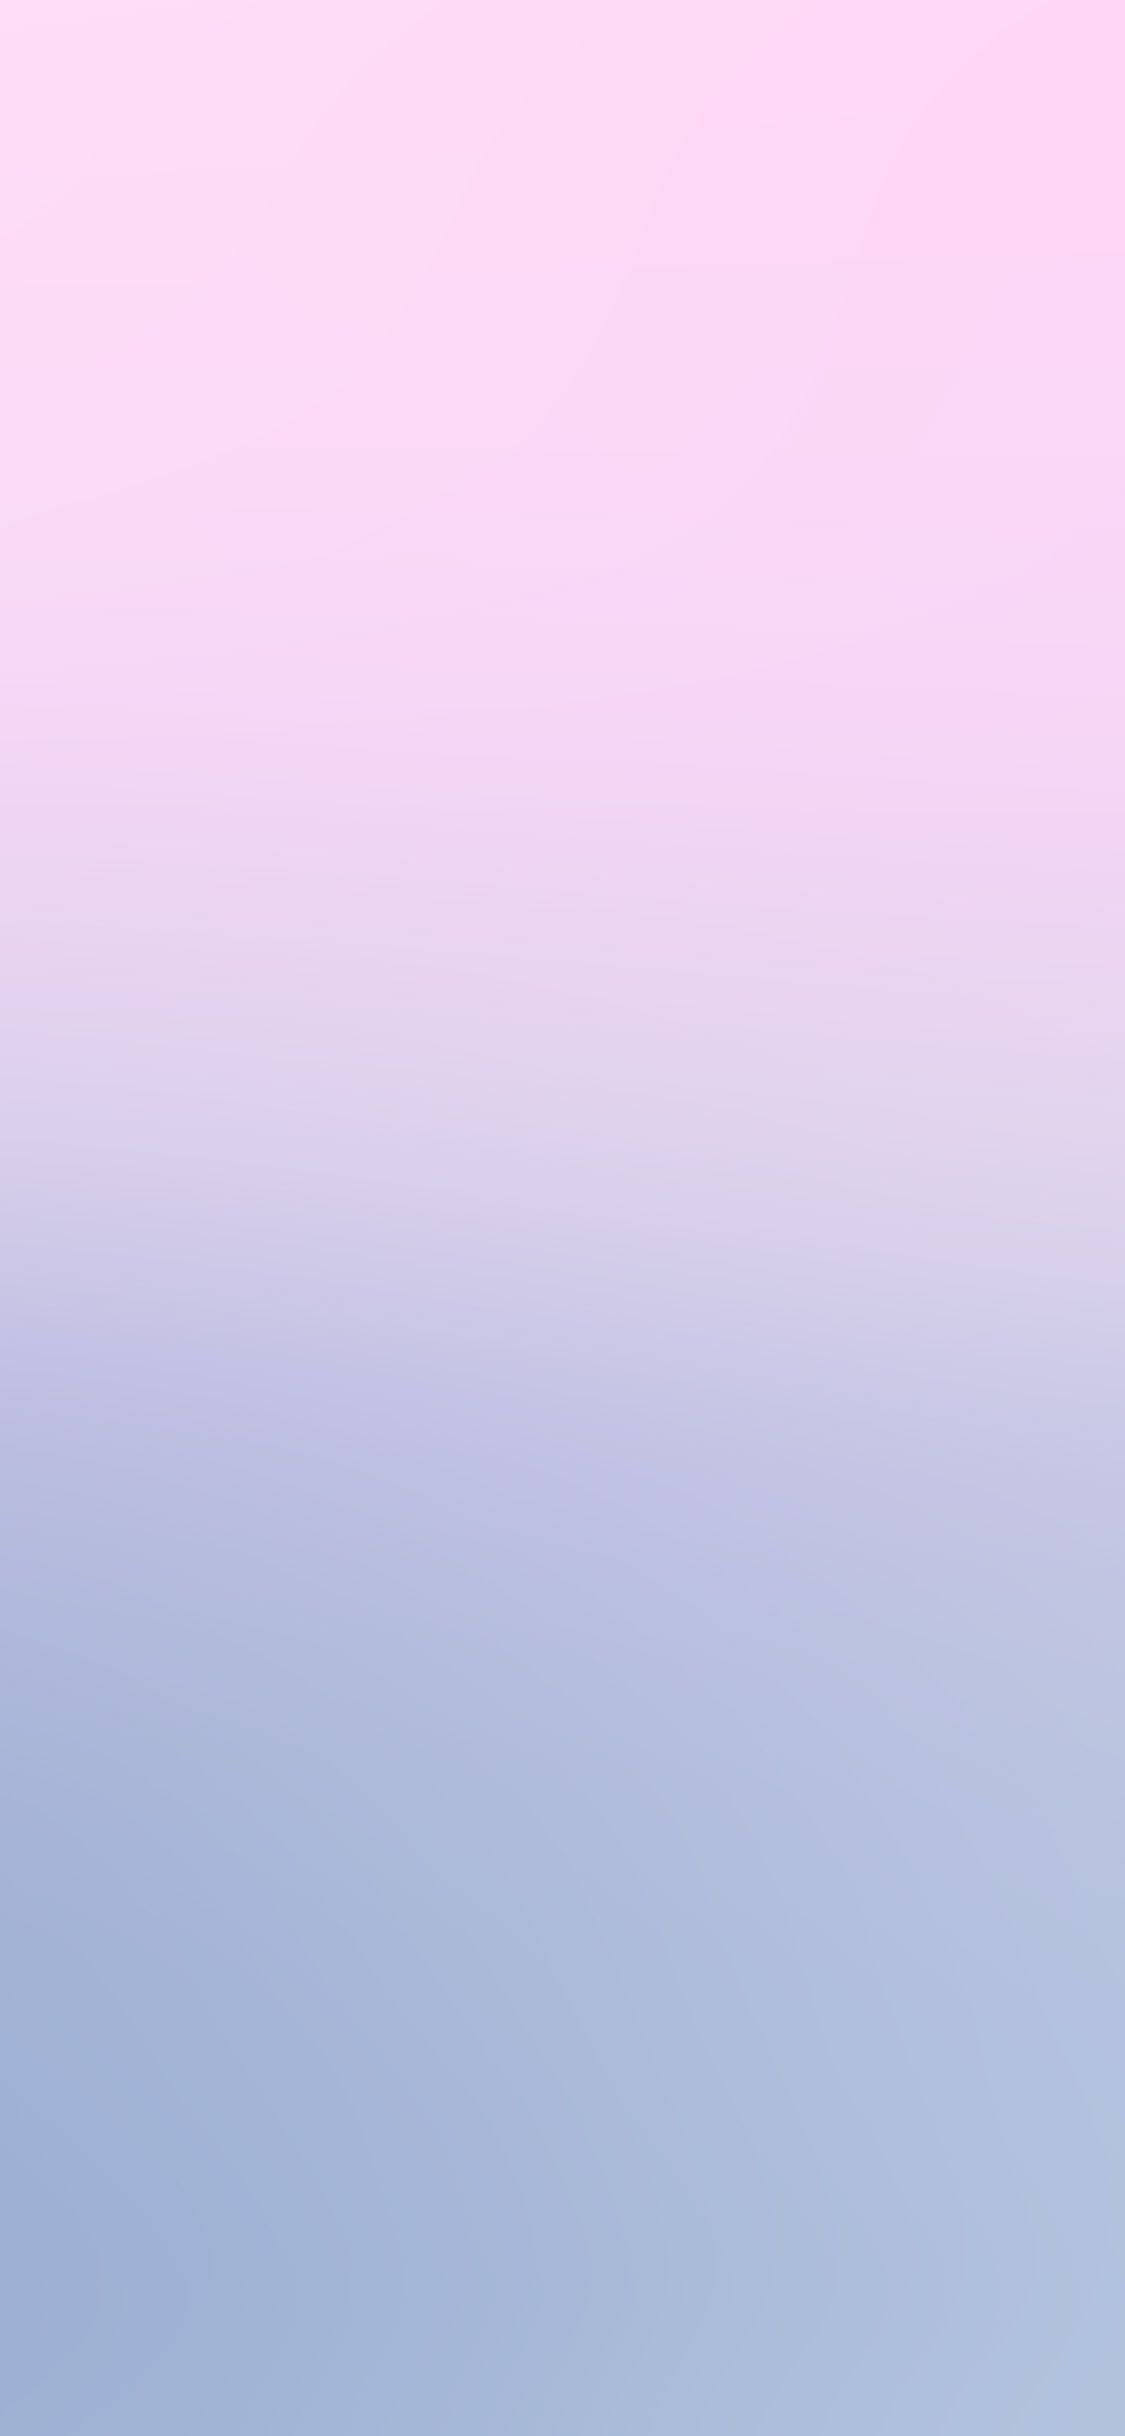 Light Blue and Pink iPhone Wallpaper Free Light Blue and Pink iPhone Background